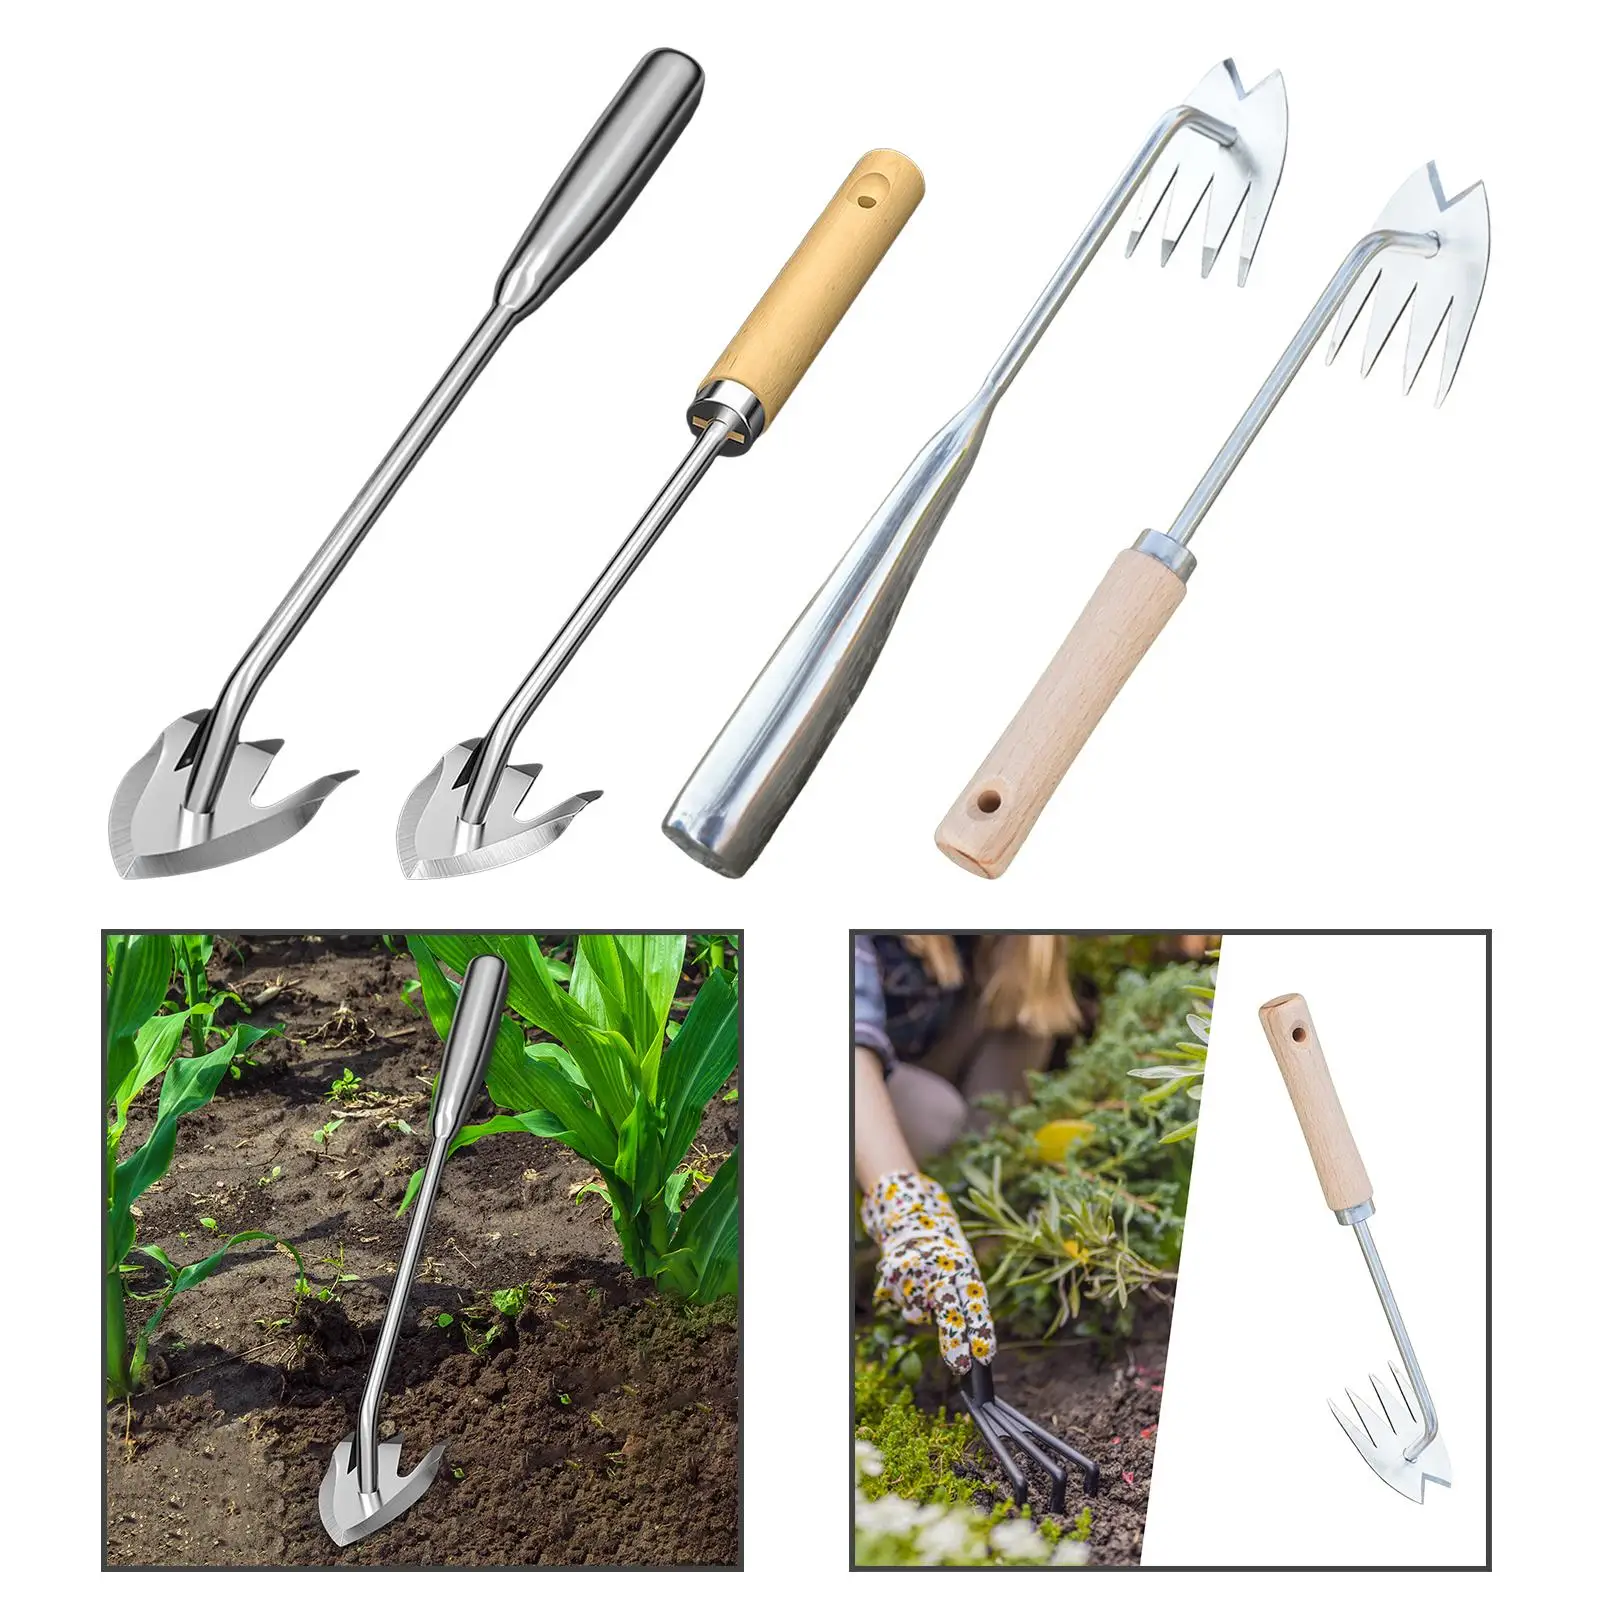 Garden Weeding Tools High Strength Comfortable Handle Stainless Steel Weed Puller for Backyard Garden Bonsai Household Lawn